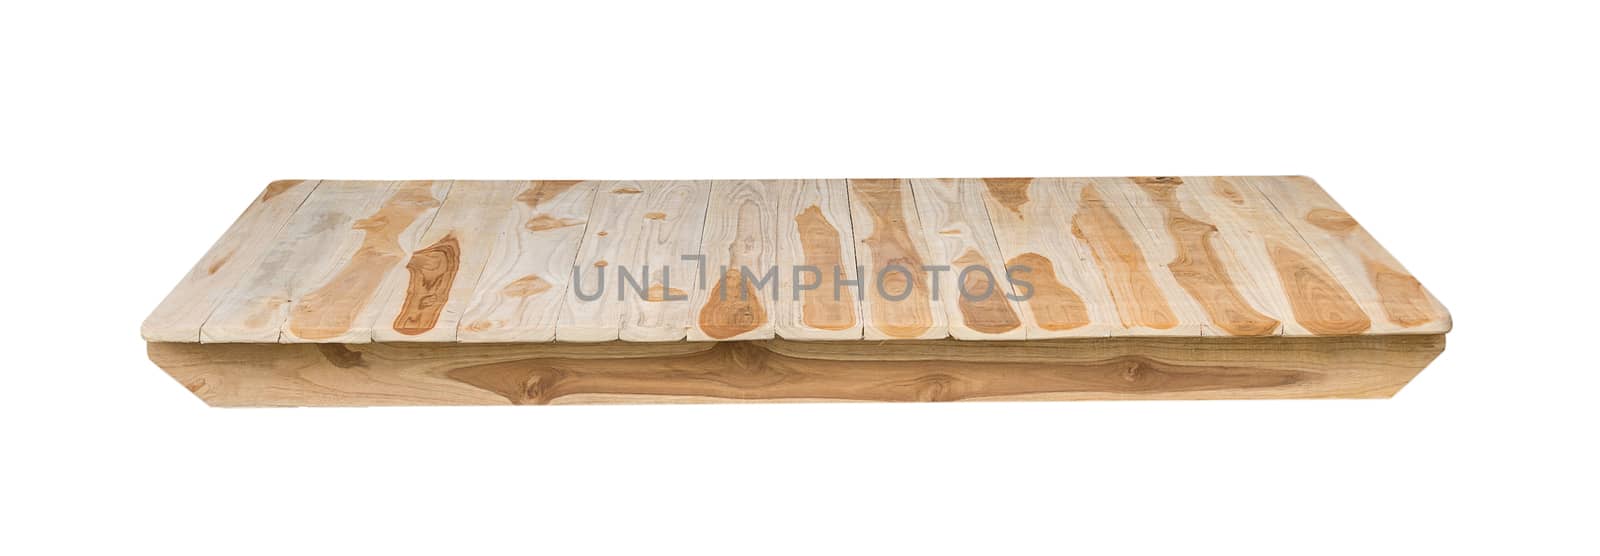 wood plank on white background by sommai